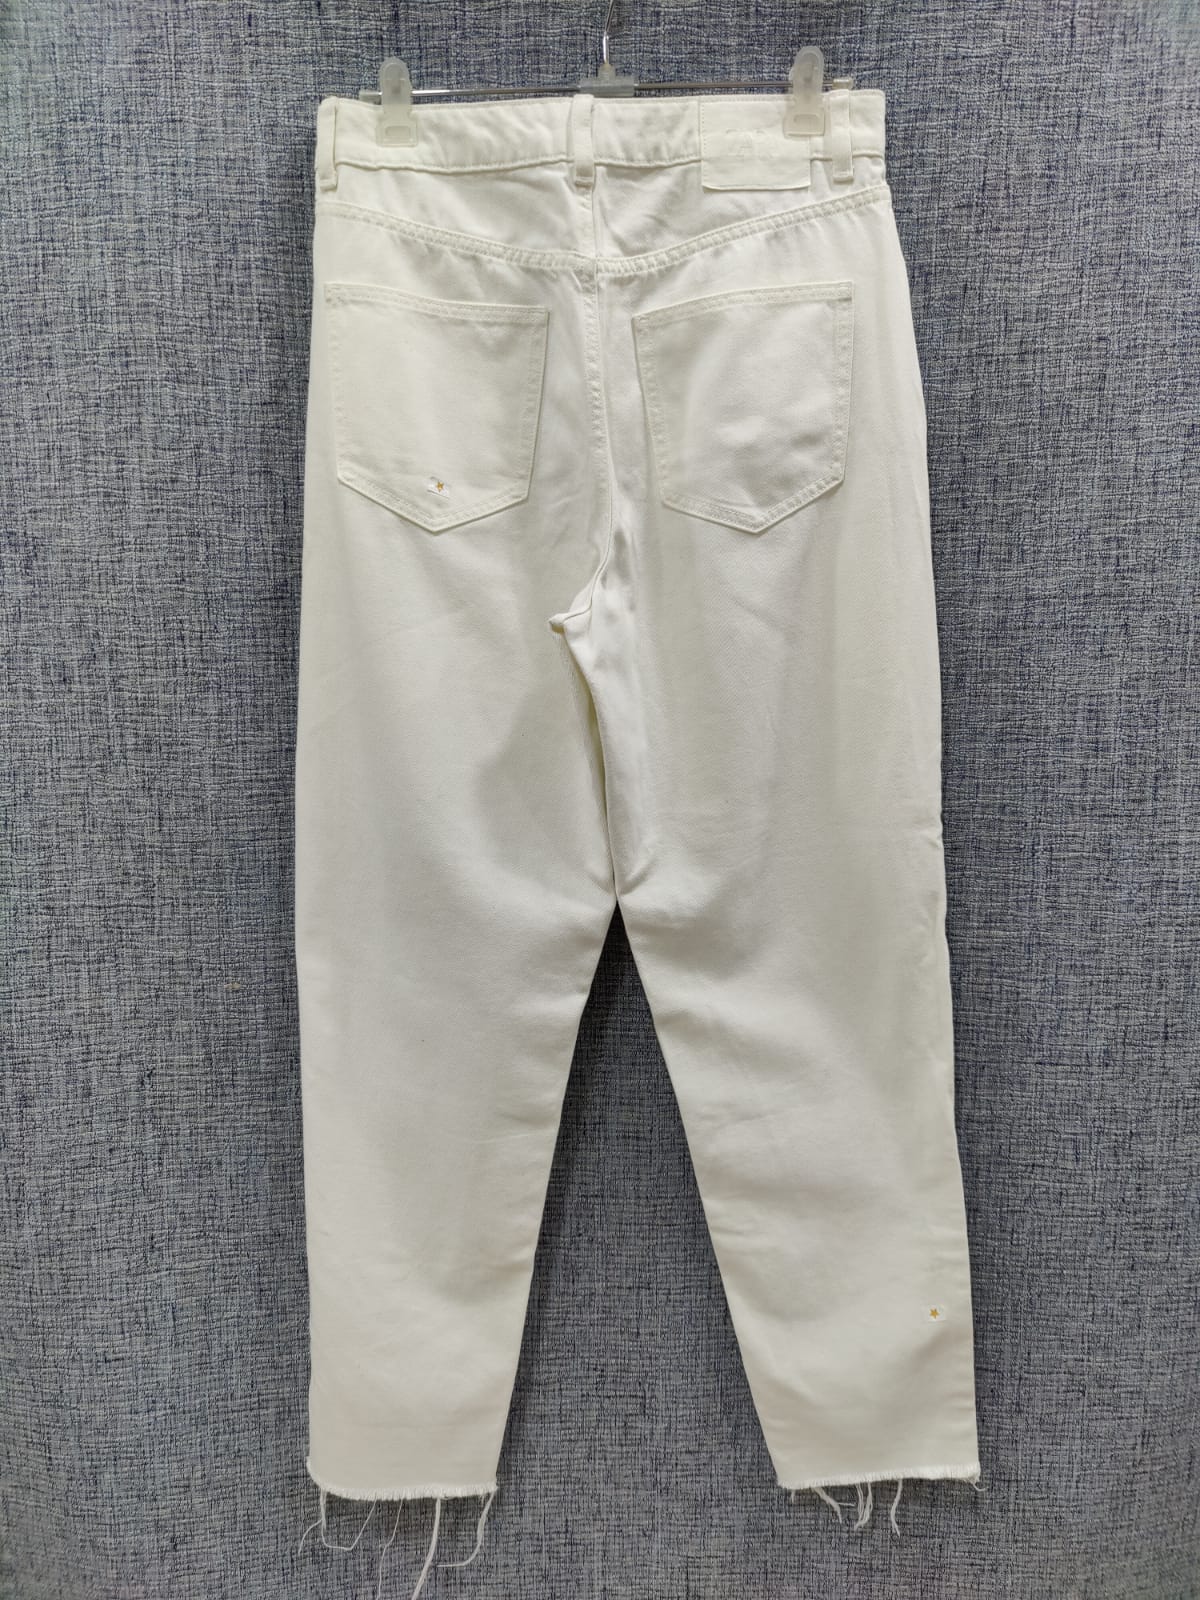 Details more than 198 white skinny jeans latest